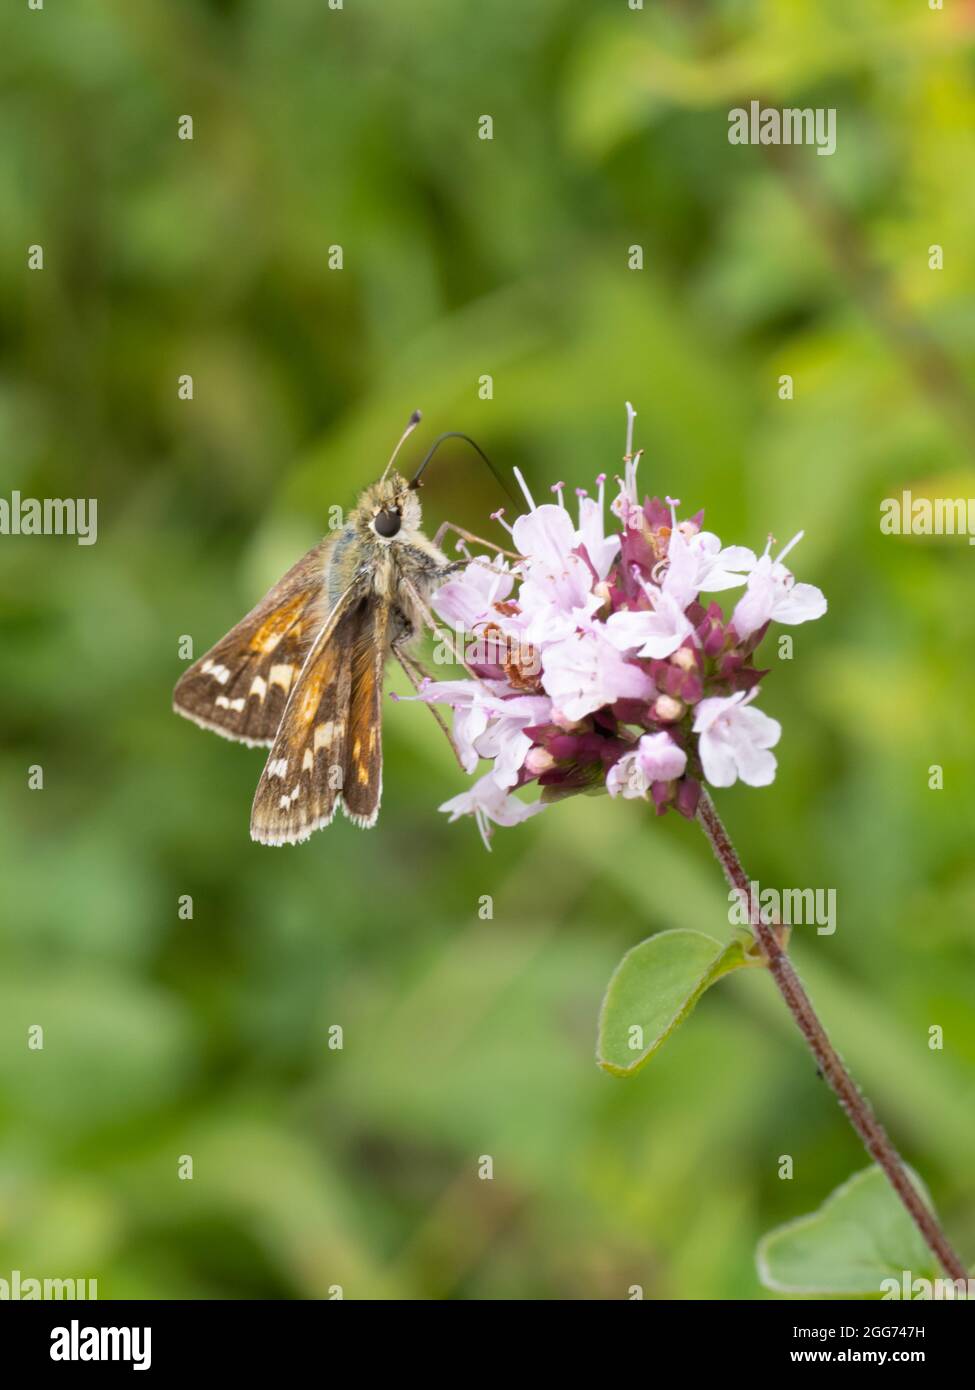 Epargyreus clarus, a Silver-spotted Skipper Butterfly perched on a Marjoram flower. Stock Photo